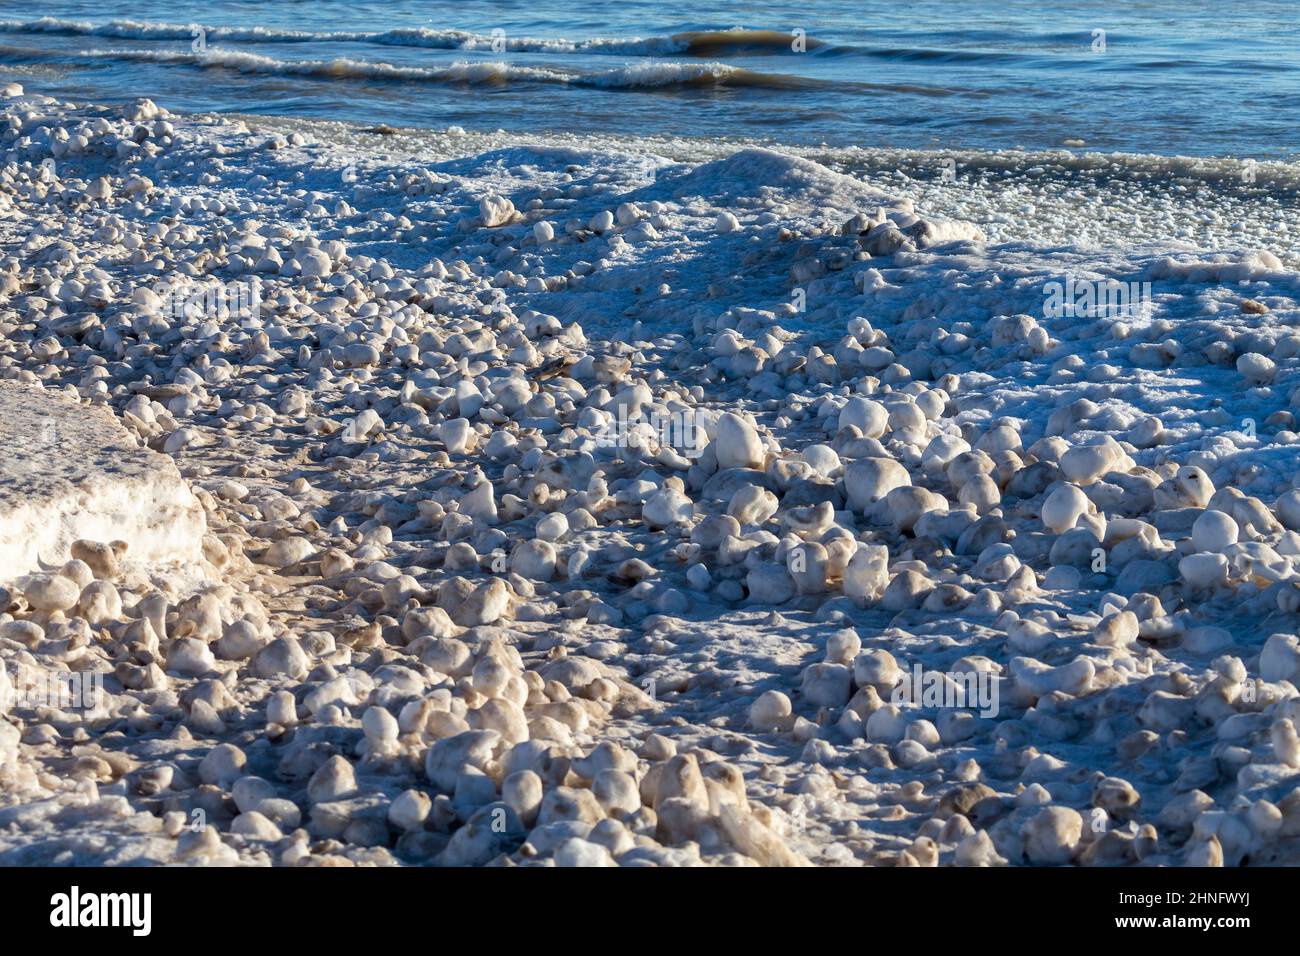 https://c8.alamy.com/comp/2HNFWYJ/snow-frost-and-wind-create-irregularly-shaped-ice-balls-on-the-shores-of-lake-michigan-2HNFWYJ.jpg